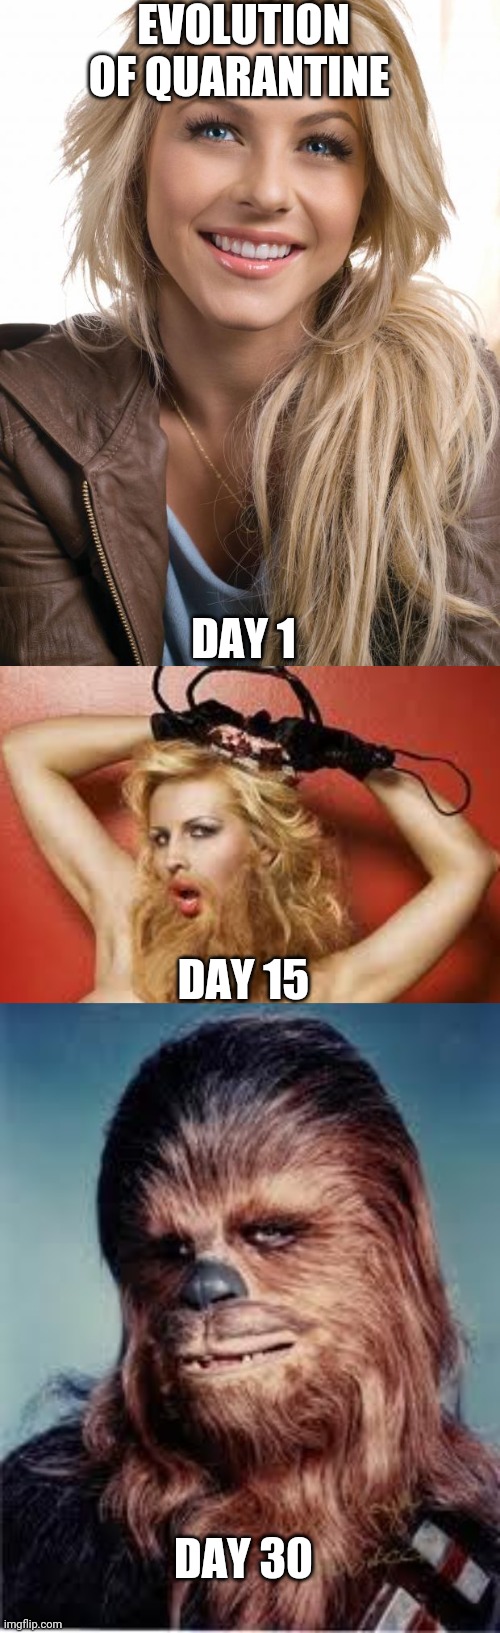 EVOLUTION OF QUARANTINE; DAY 1; DAY 15; DAY 30 | image tagged in memes,oblivious hot girl,chewbacca,bearded lady | made w/ Imgflip meme maker